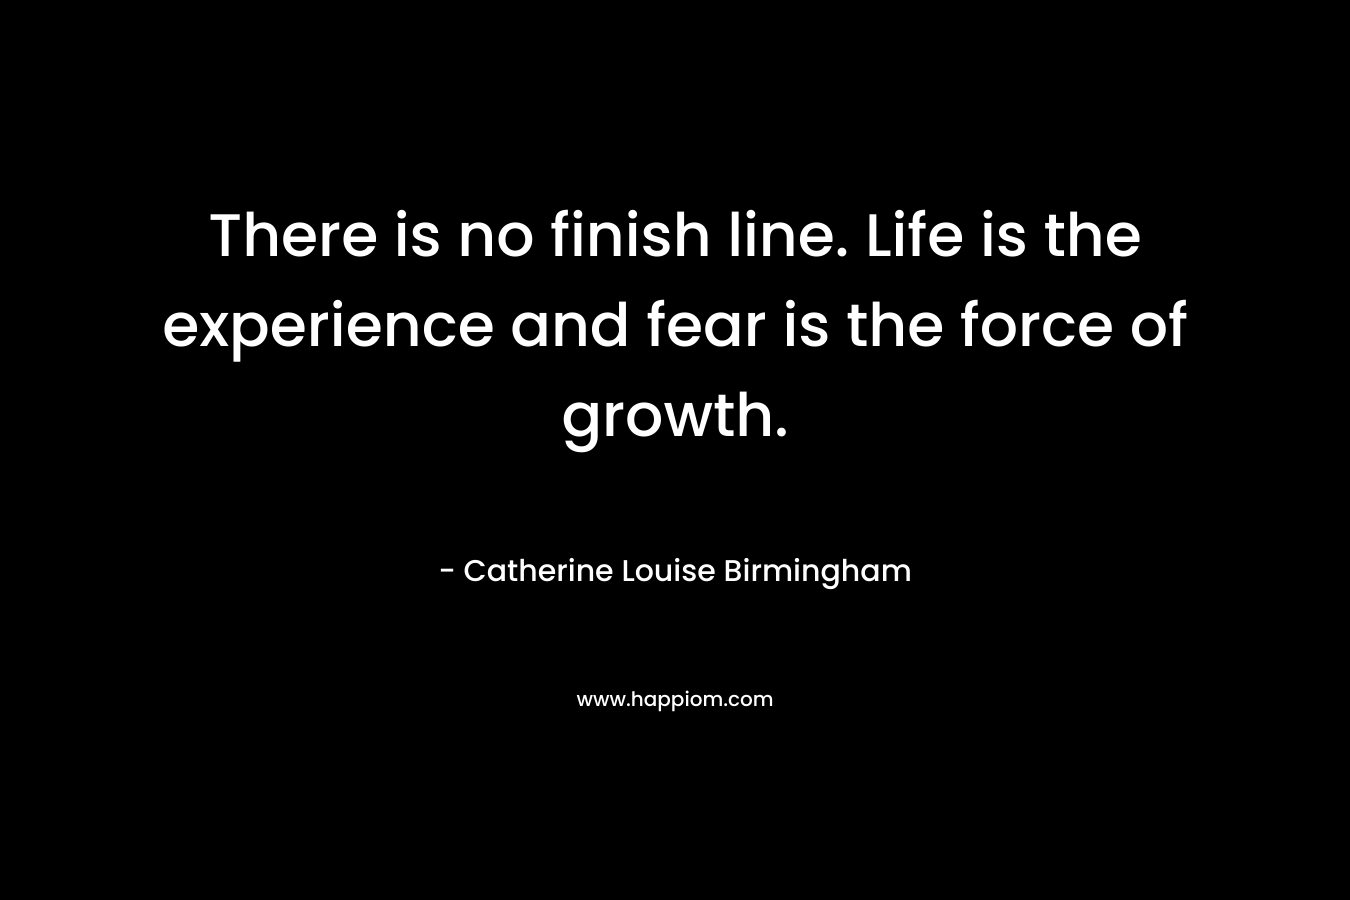 There is no finish line. Life is the experience and fear is the force of growth.